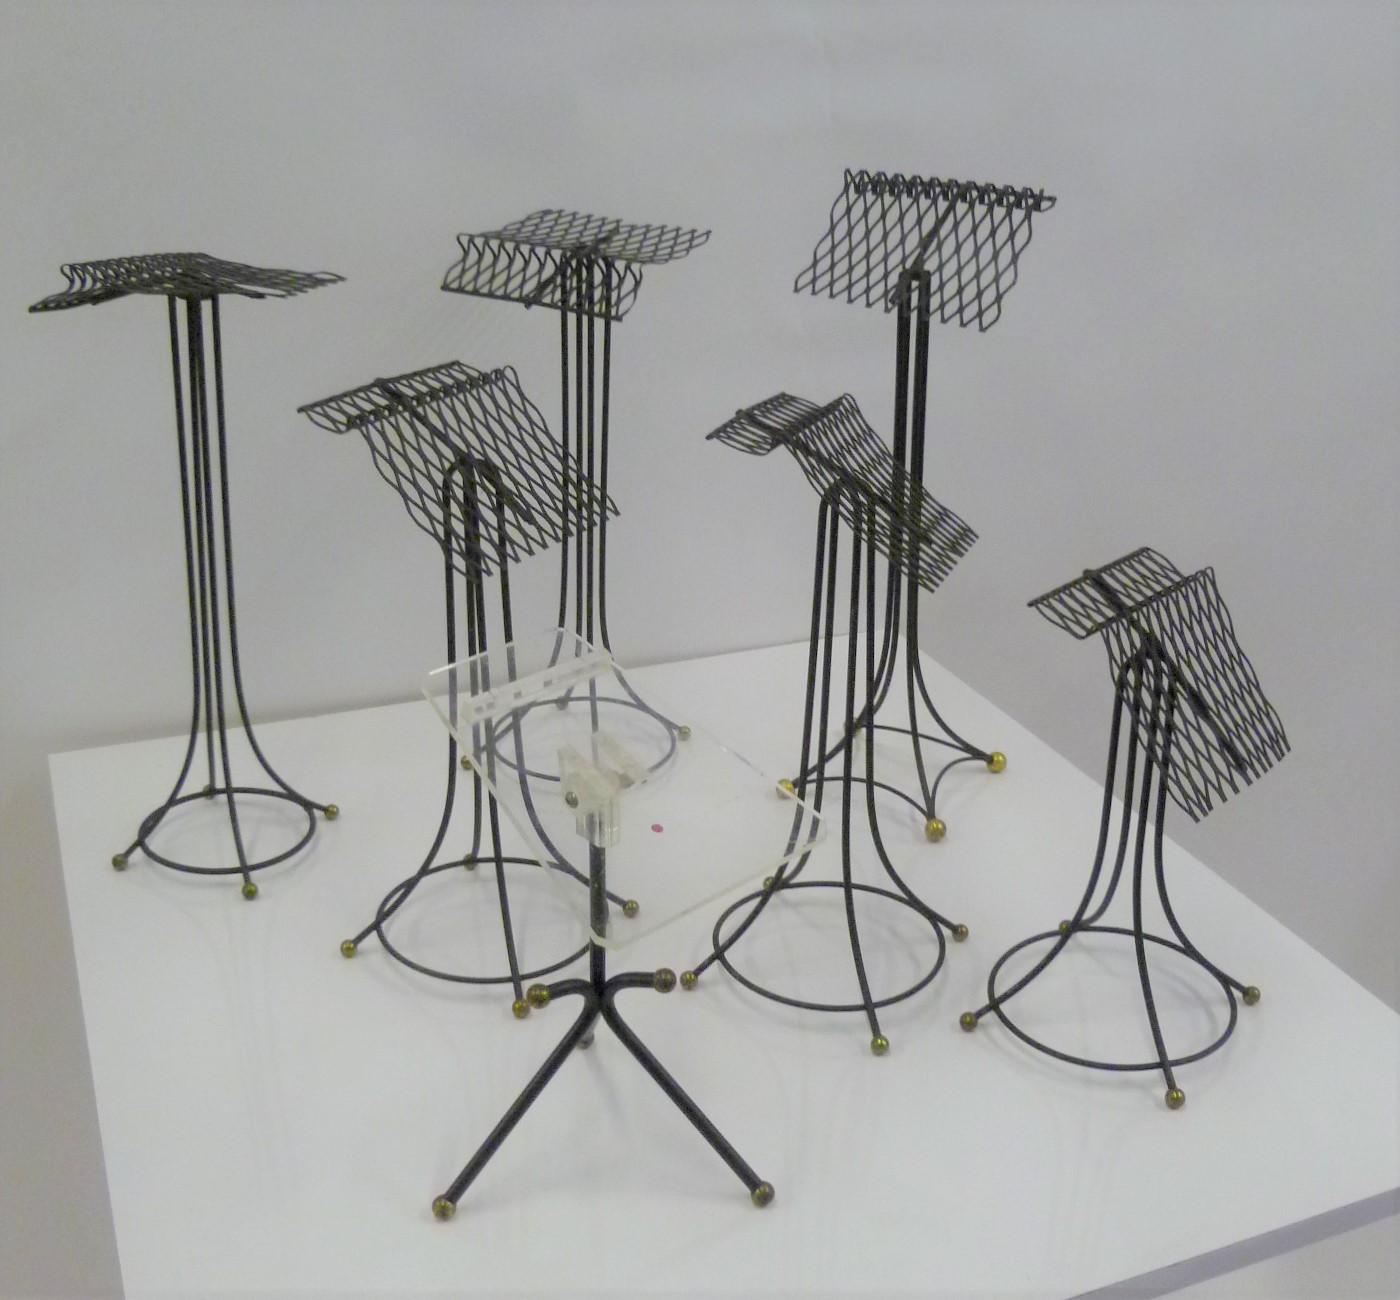 From the 1930s-40s sculptural group of 7 black metal store display stands, most likely for ladies shoes. Three different styles: one with a Lucite top, one with Eiffel tower base and 5 different heights with rounded base. In very good original